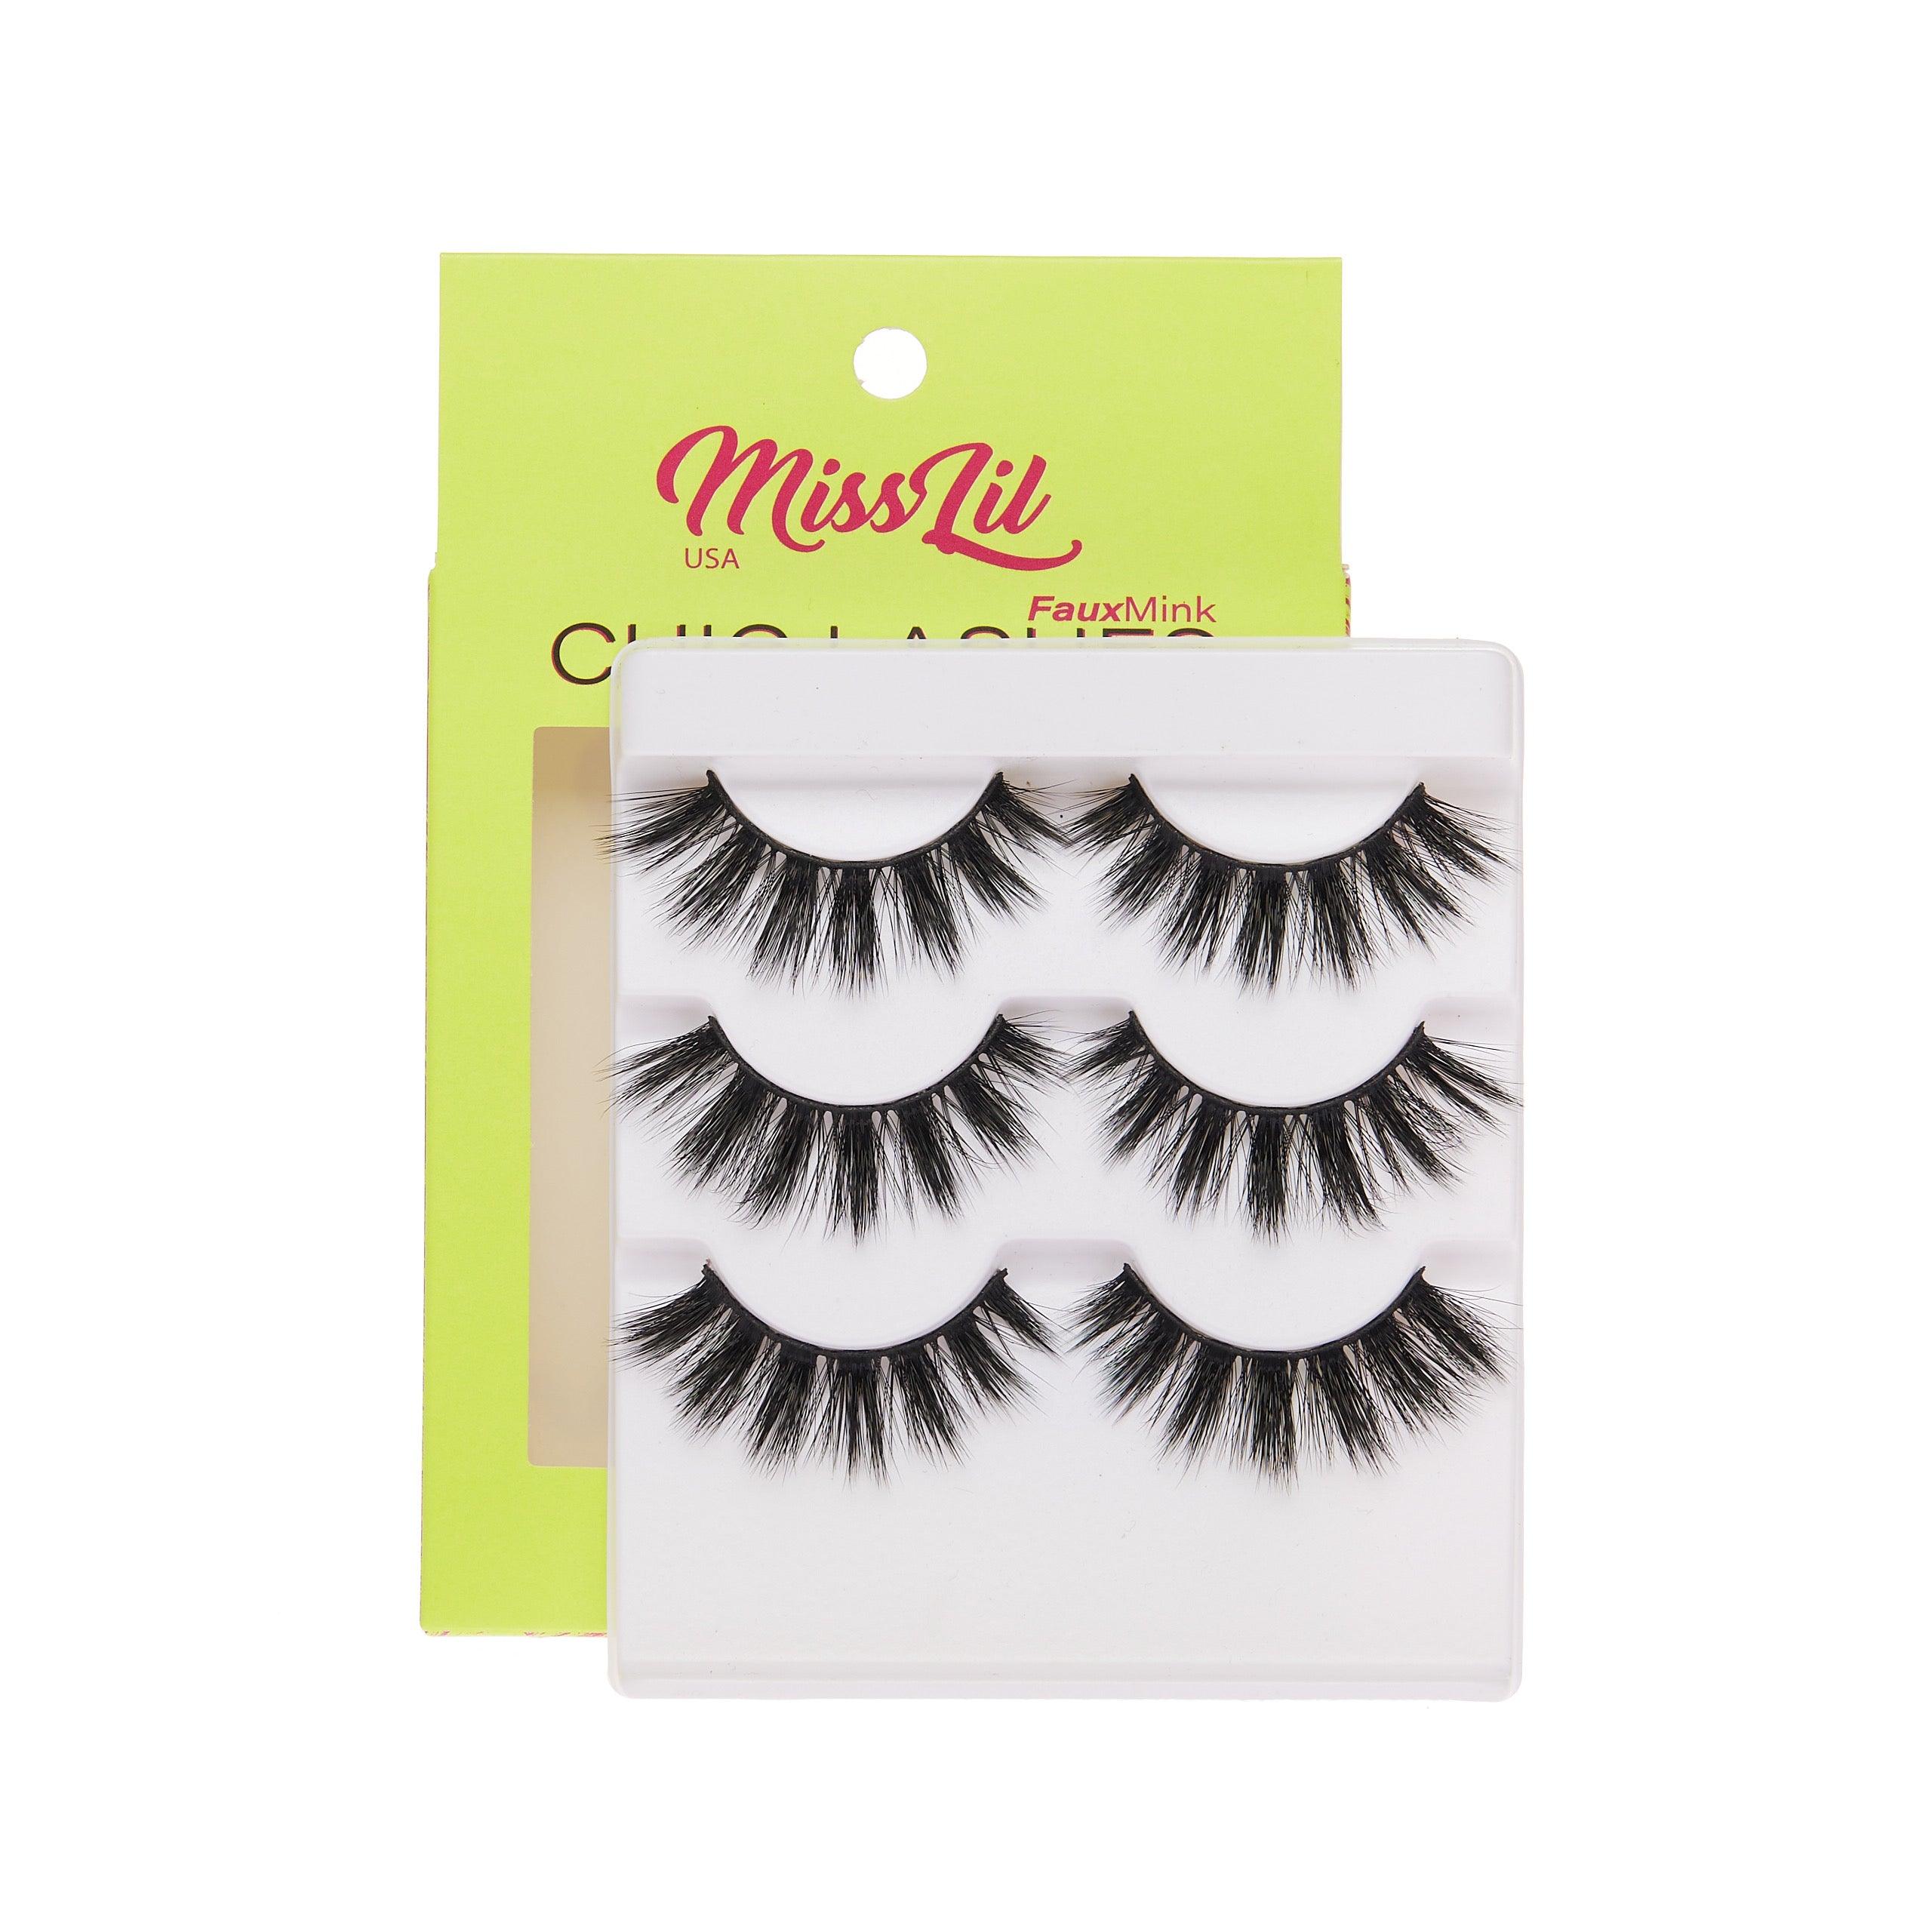 3-Pair Faux Mink Eyelashes - Chic Lashes Collection #7 - Pack of 3 - Miss Lil USA